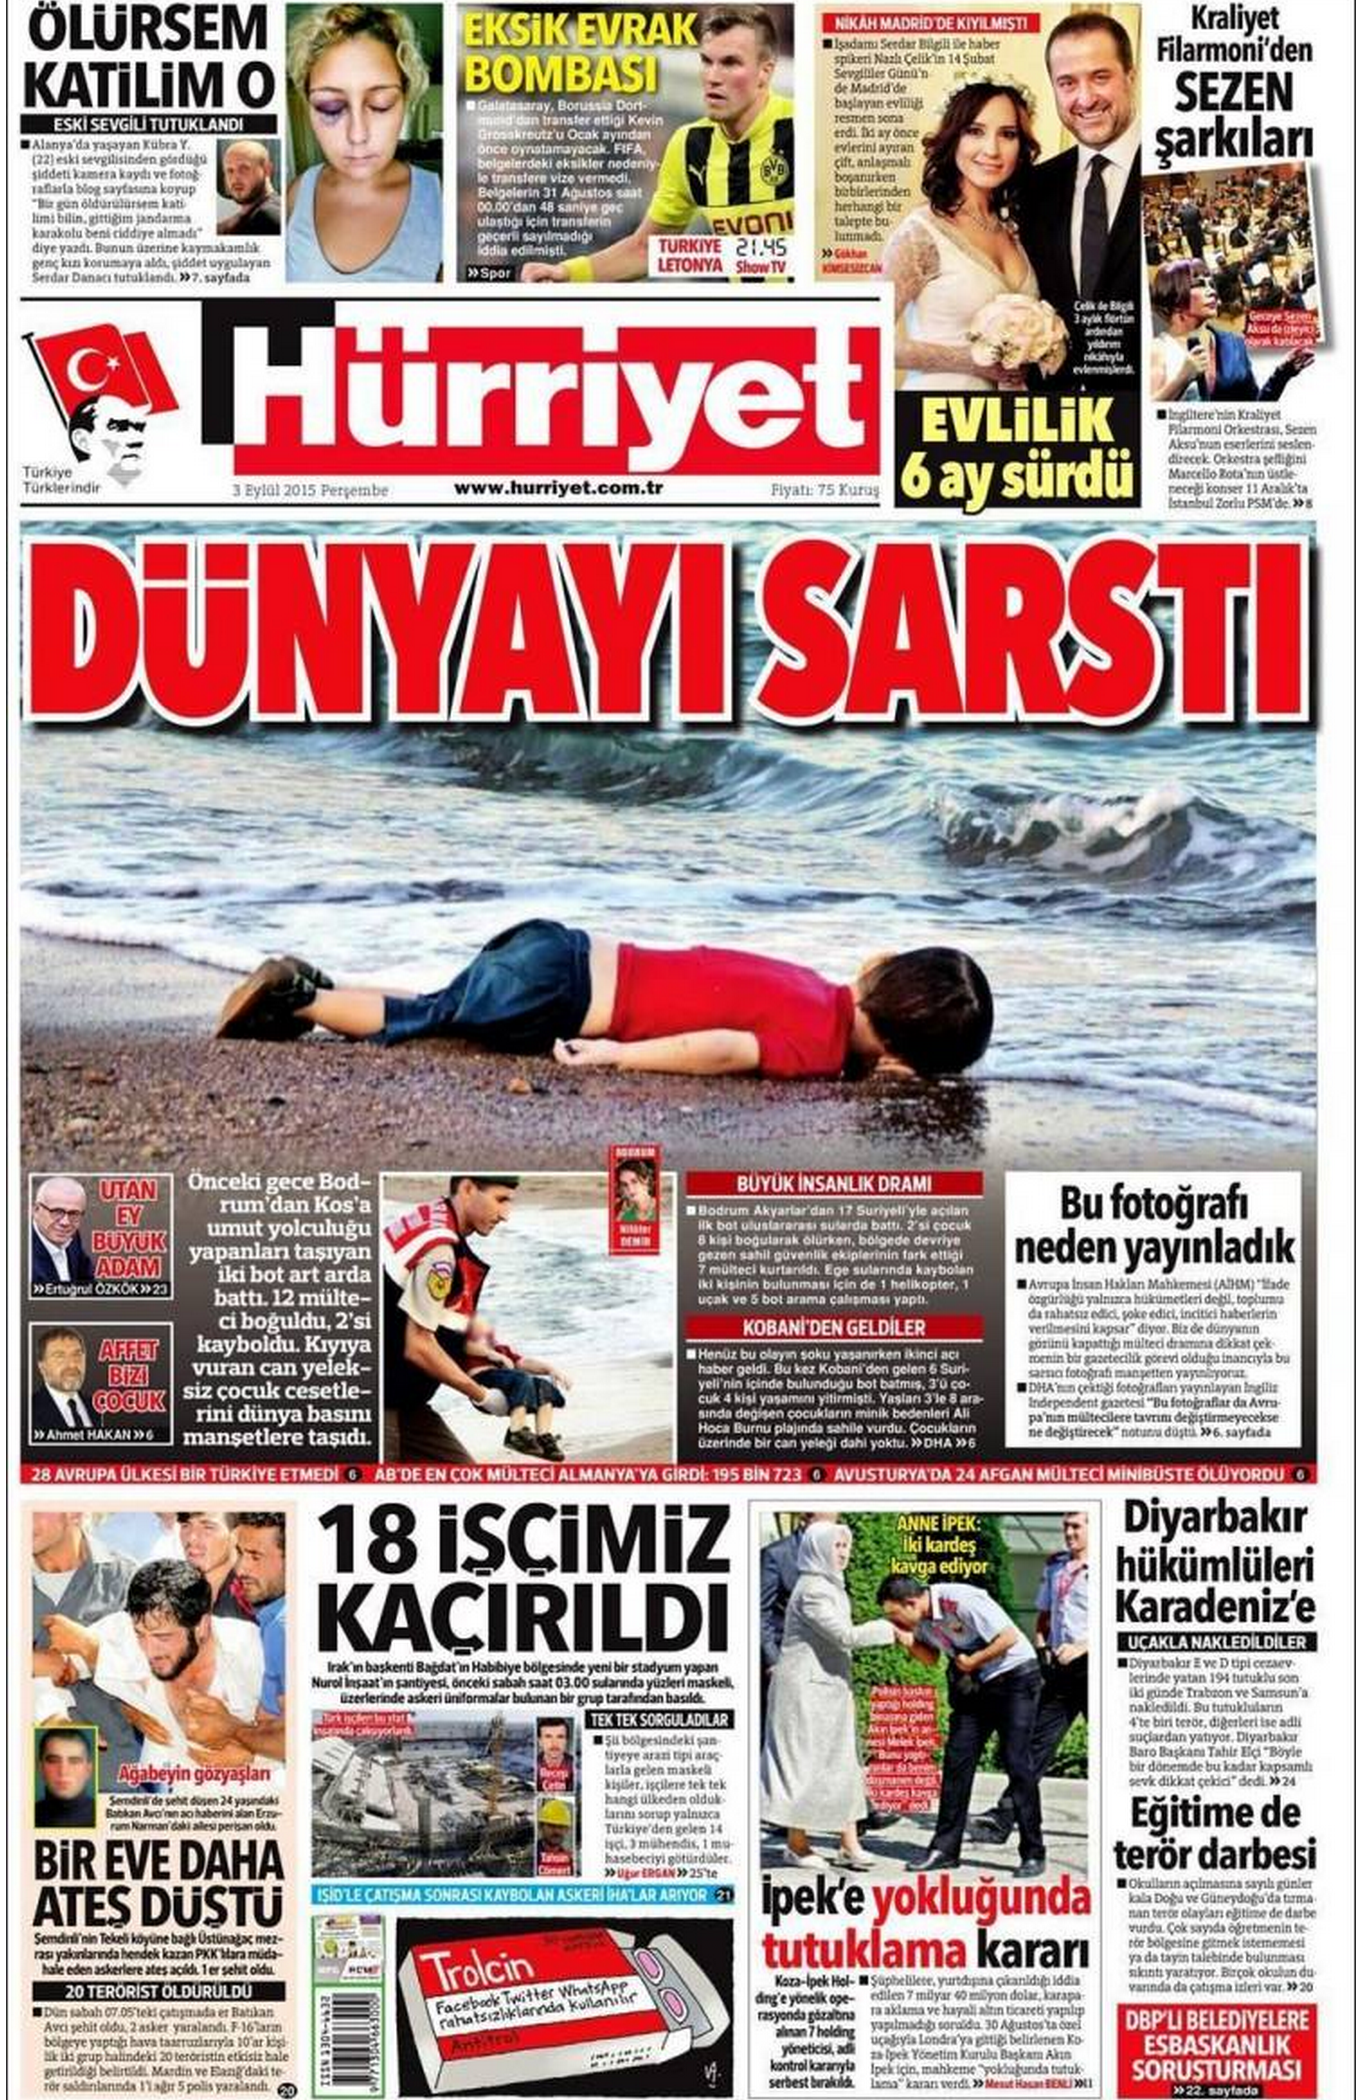 Drowned Migrant Boy Hurriyet front page